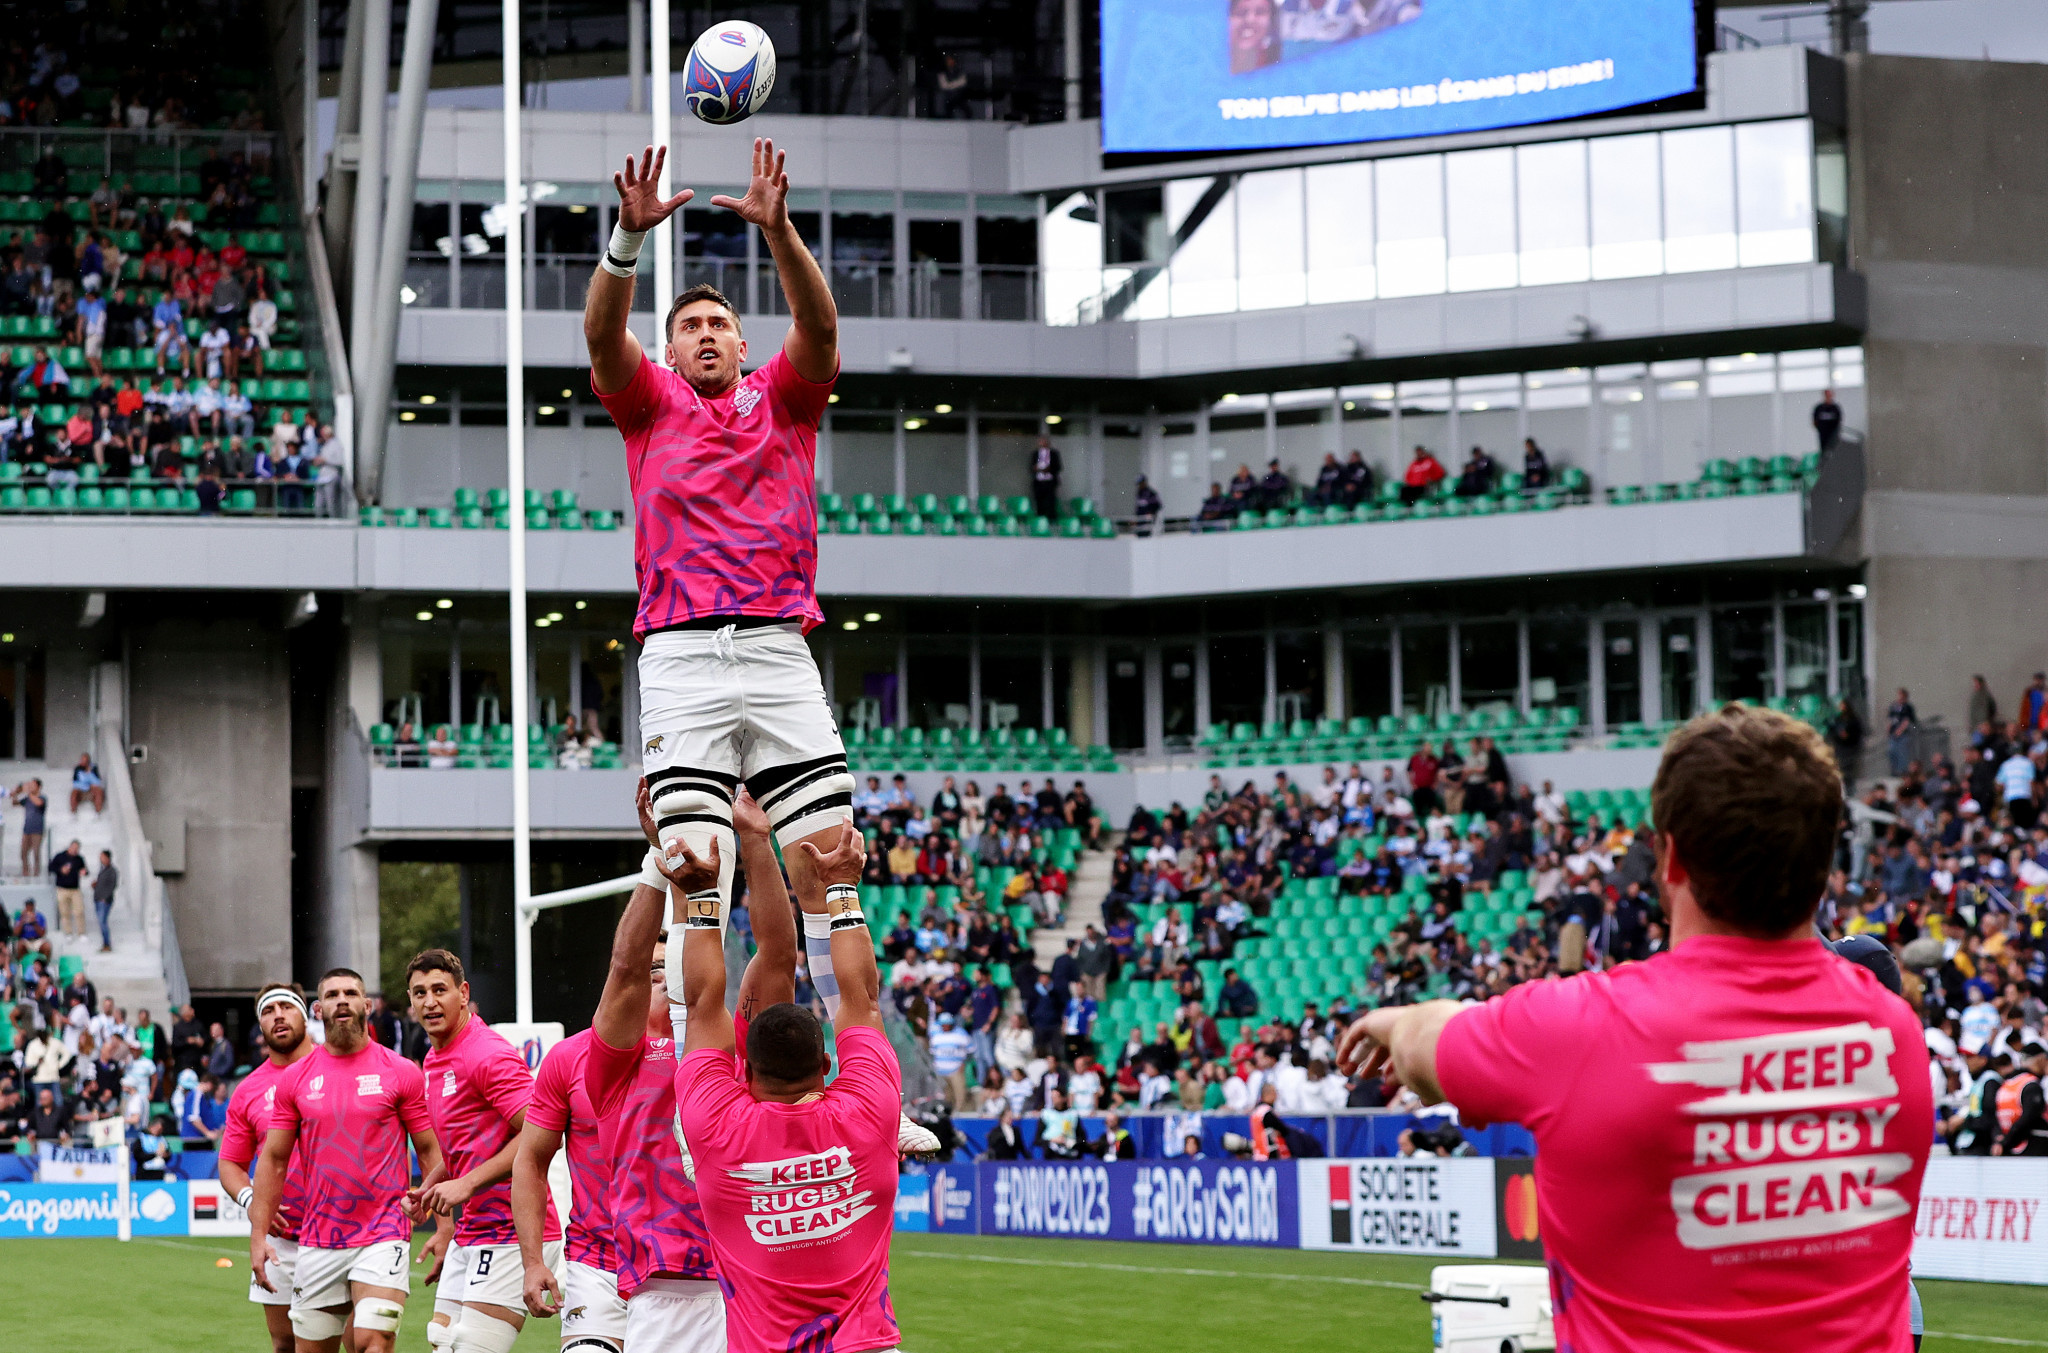 Branded warm-up tops are among the initiatives promoting Keep Rugby Clean weekend ©Getty Images